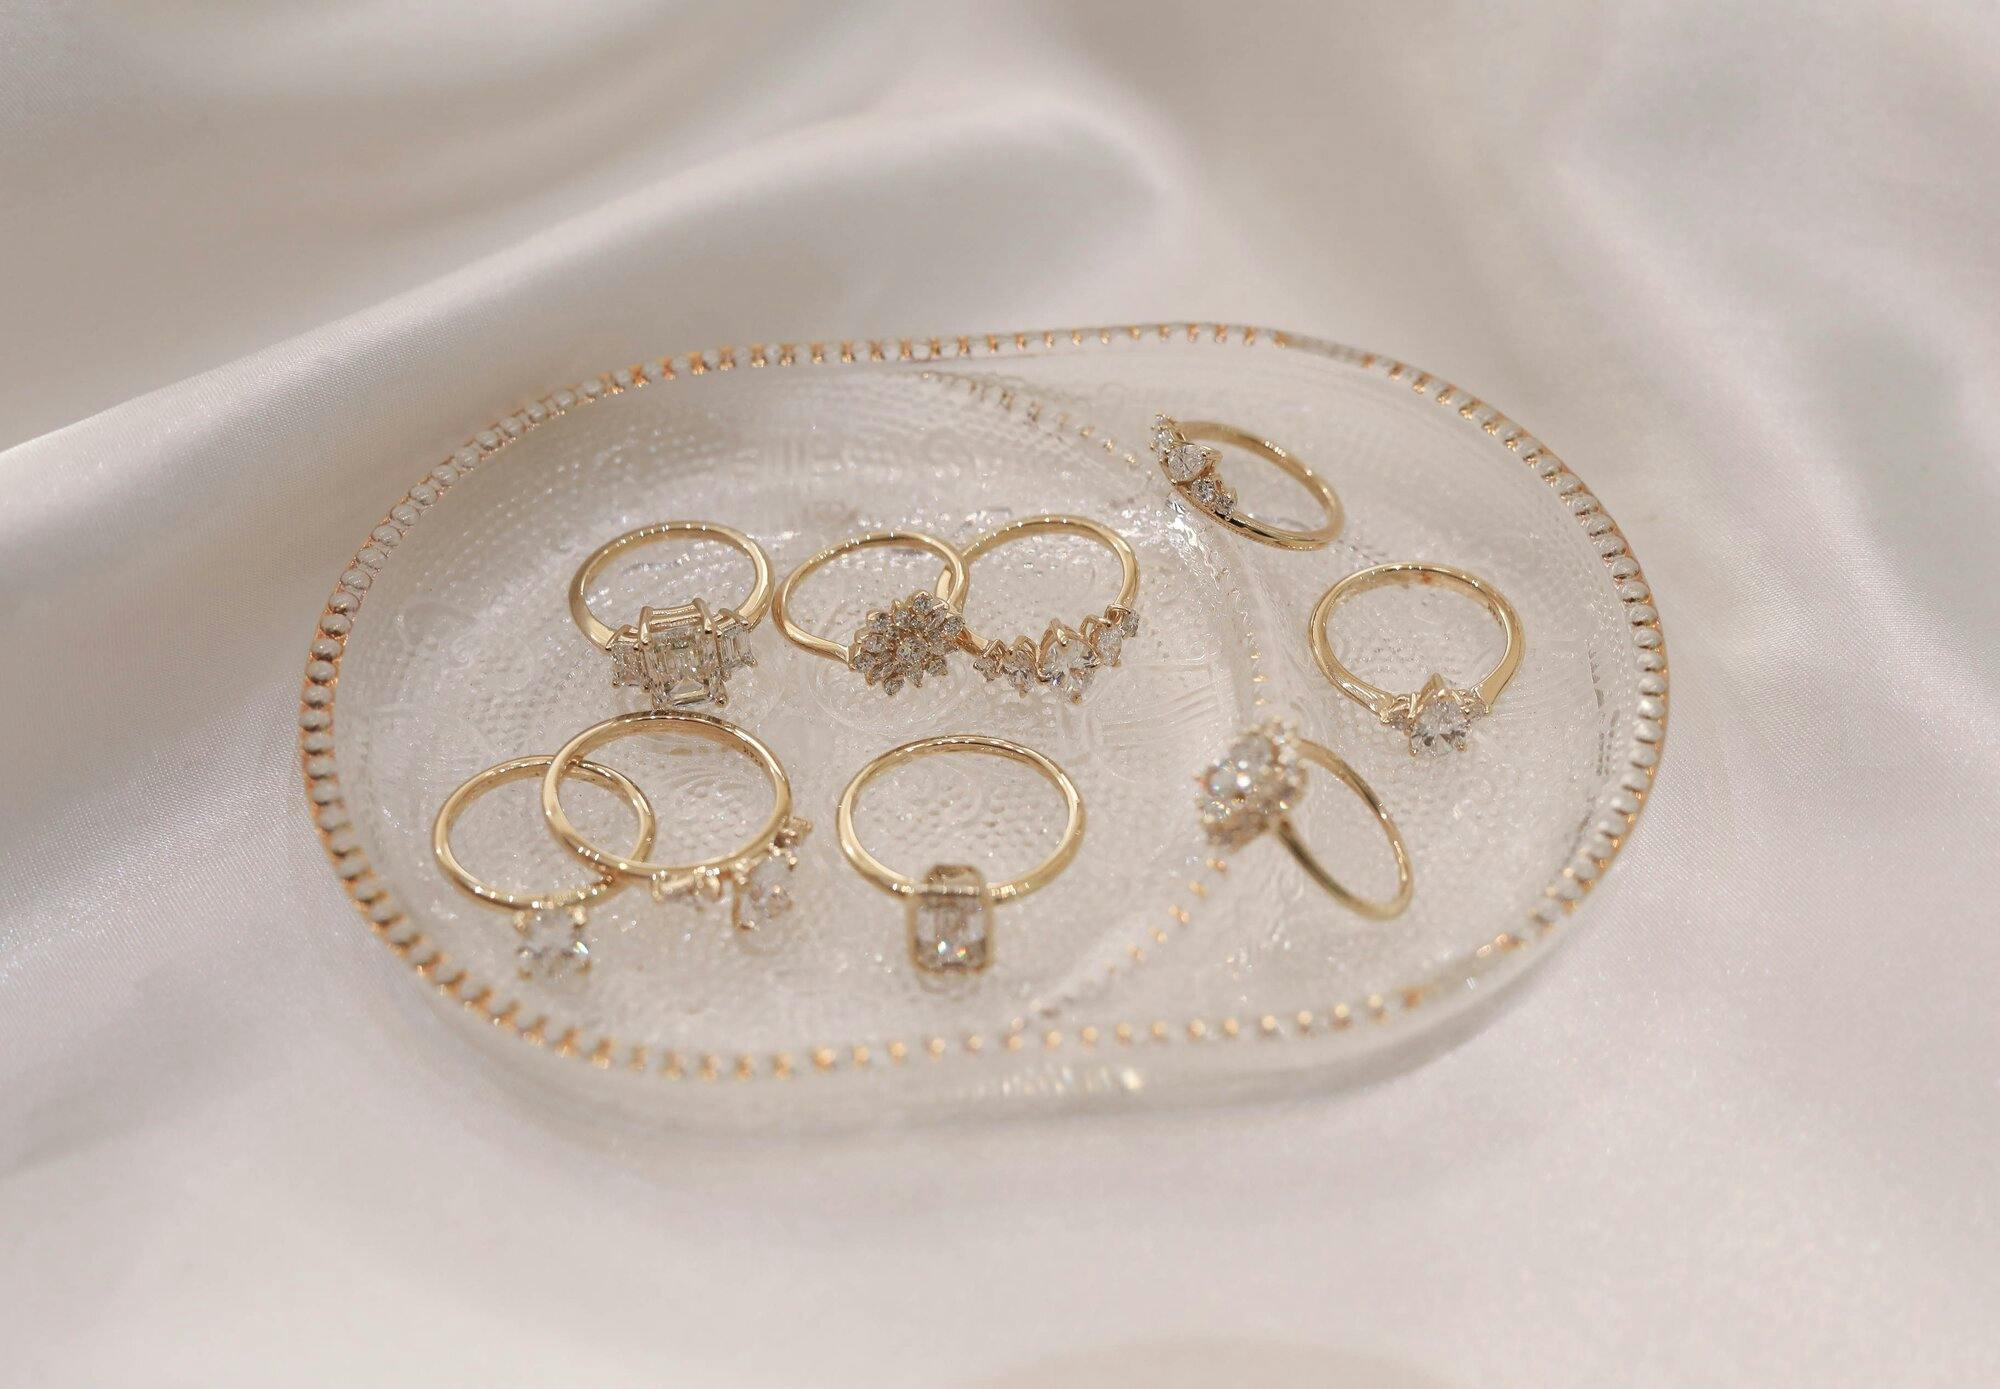 group shot of rings in a glass dish